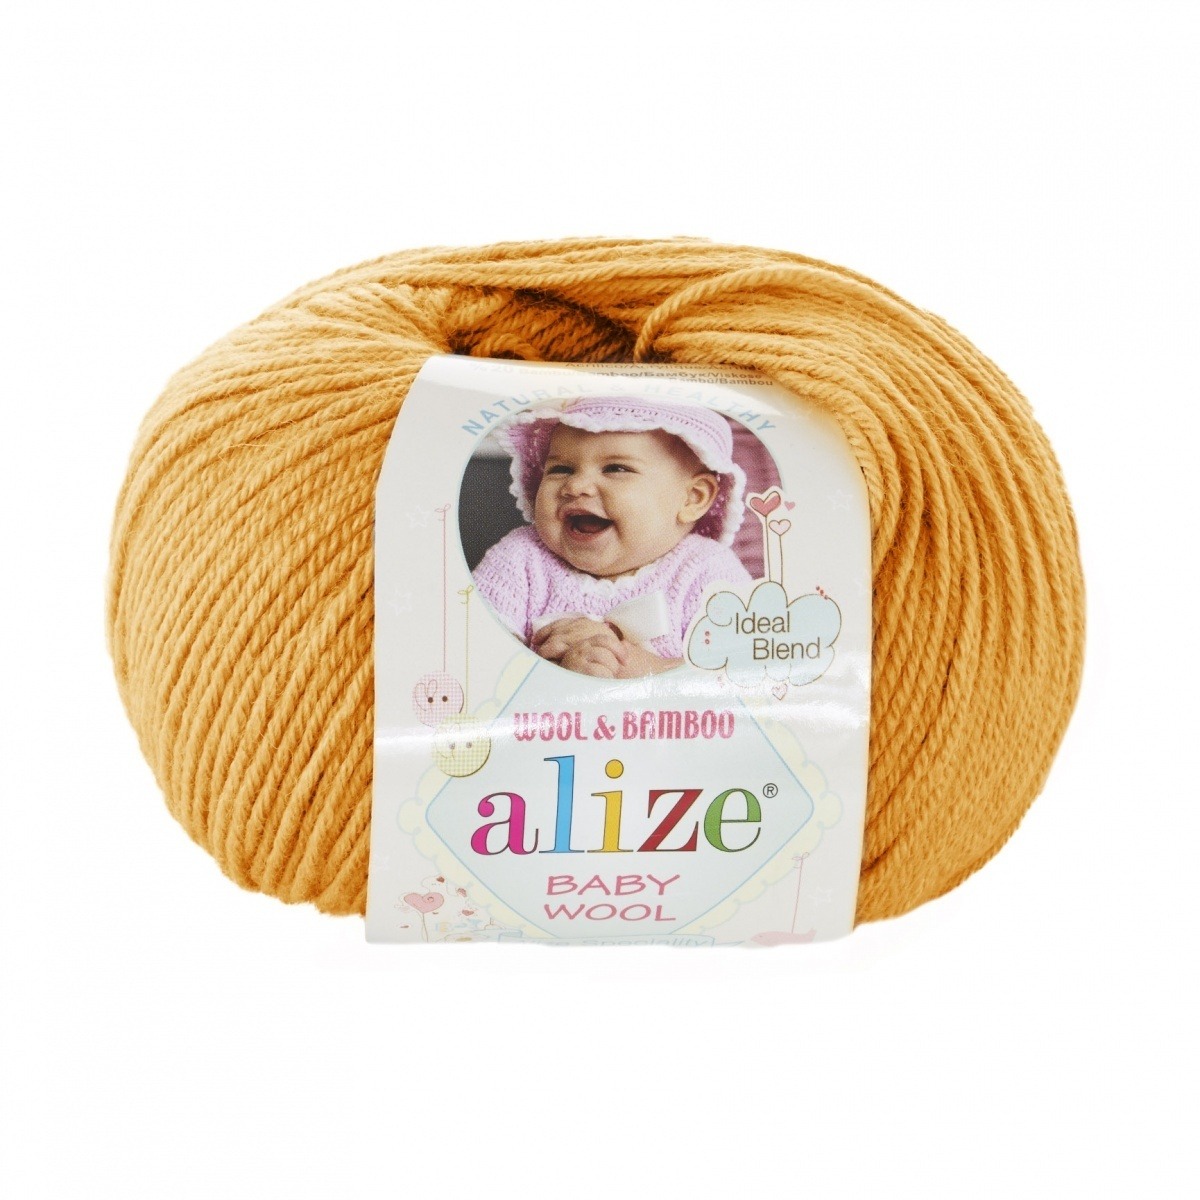 Alize "Baby wool" (14)